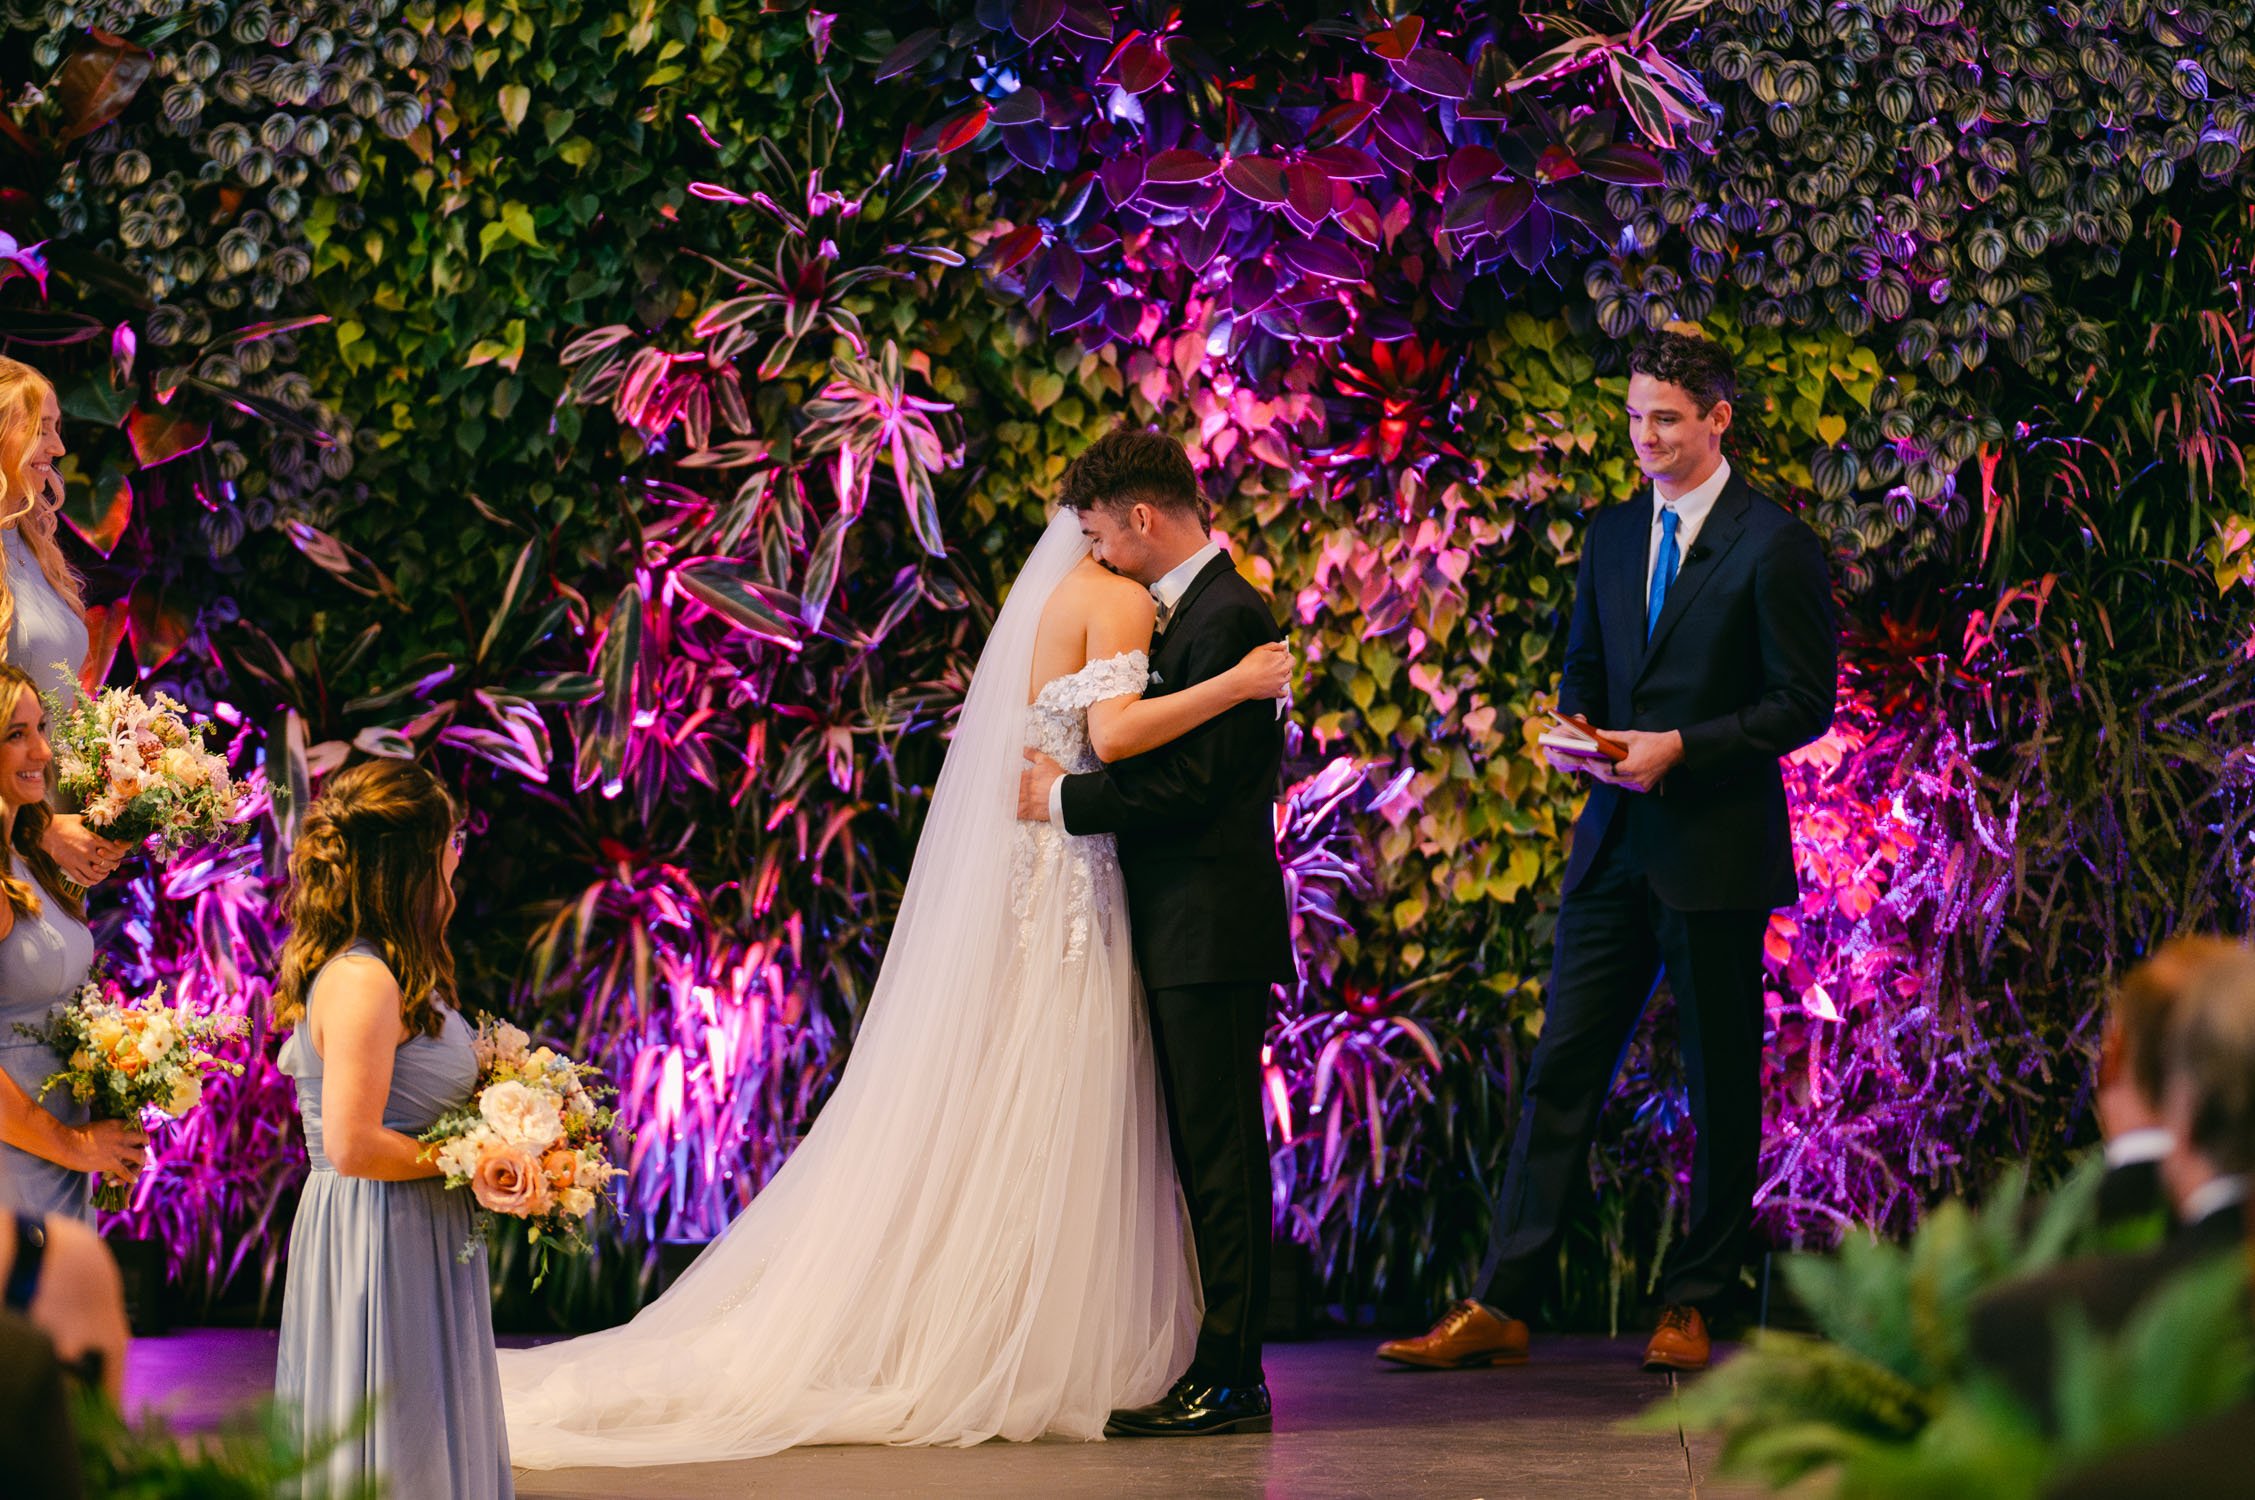 California academy of Sciences in San Francisco Wedding, photo of the newly wed couple hugging during their ceremony